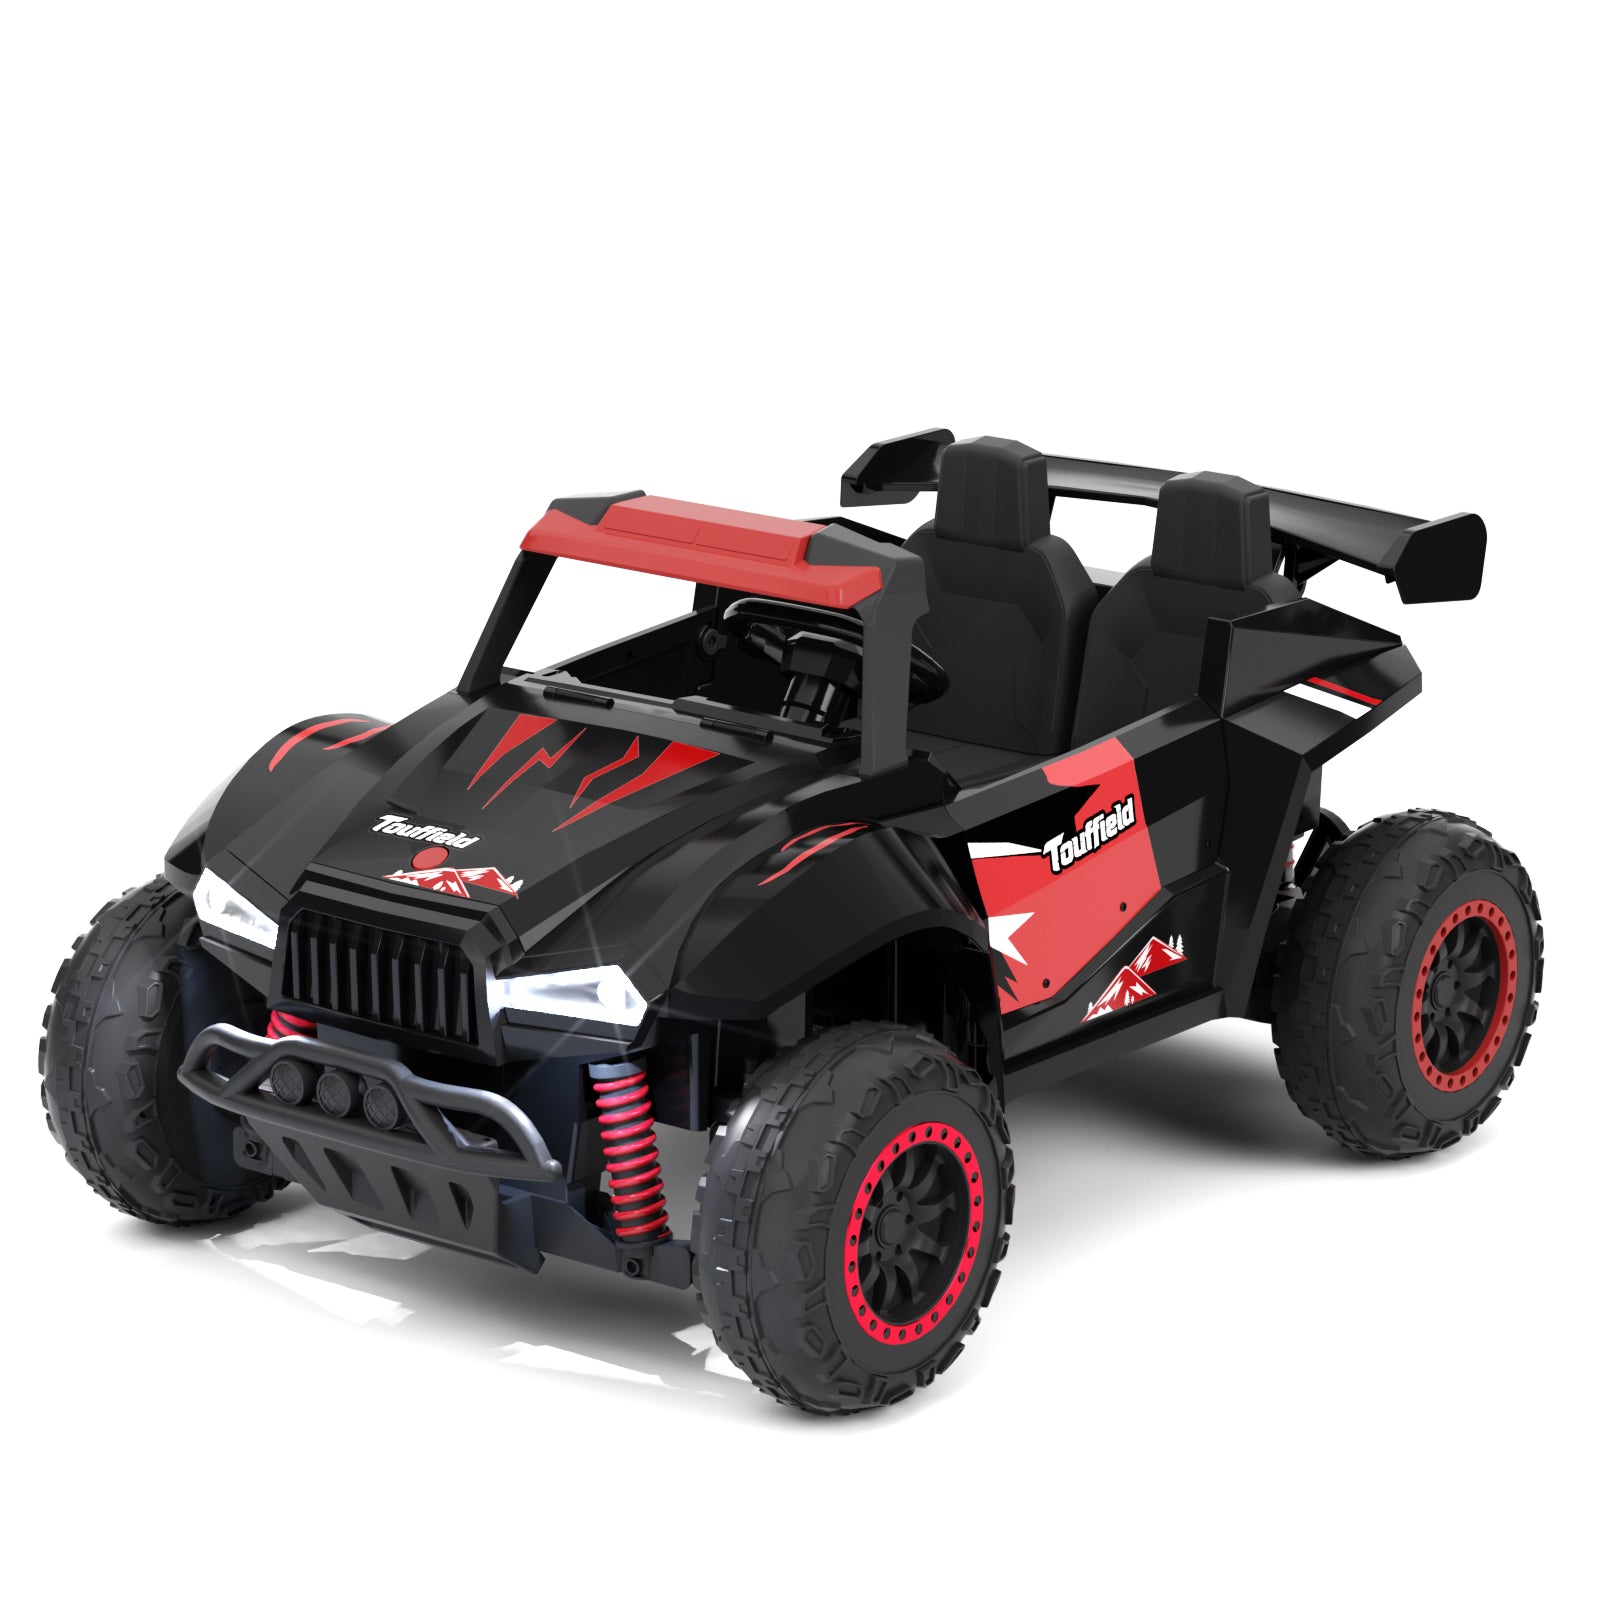 XJD 24V 7AH Ride On Car with Remote Control, 4WD Switchable, 2 Seats, Power Car for Kids, Black&Red